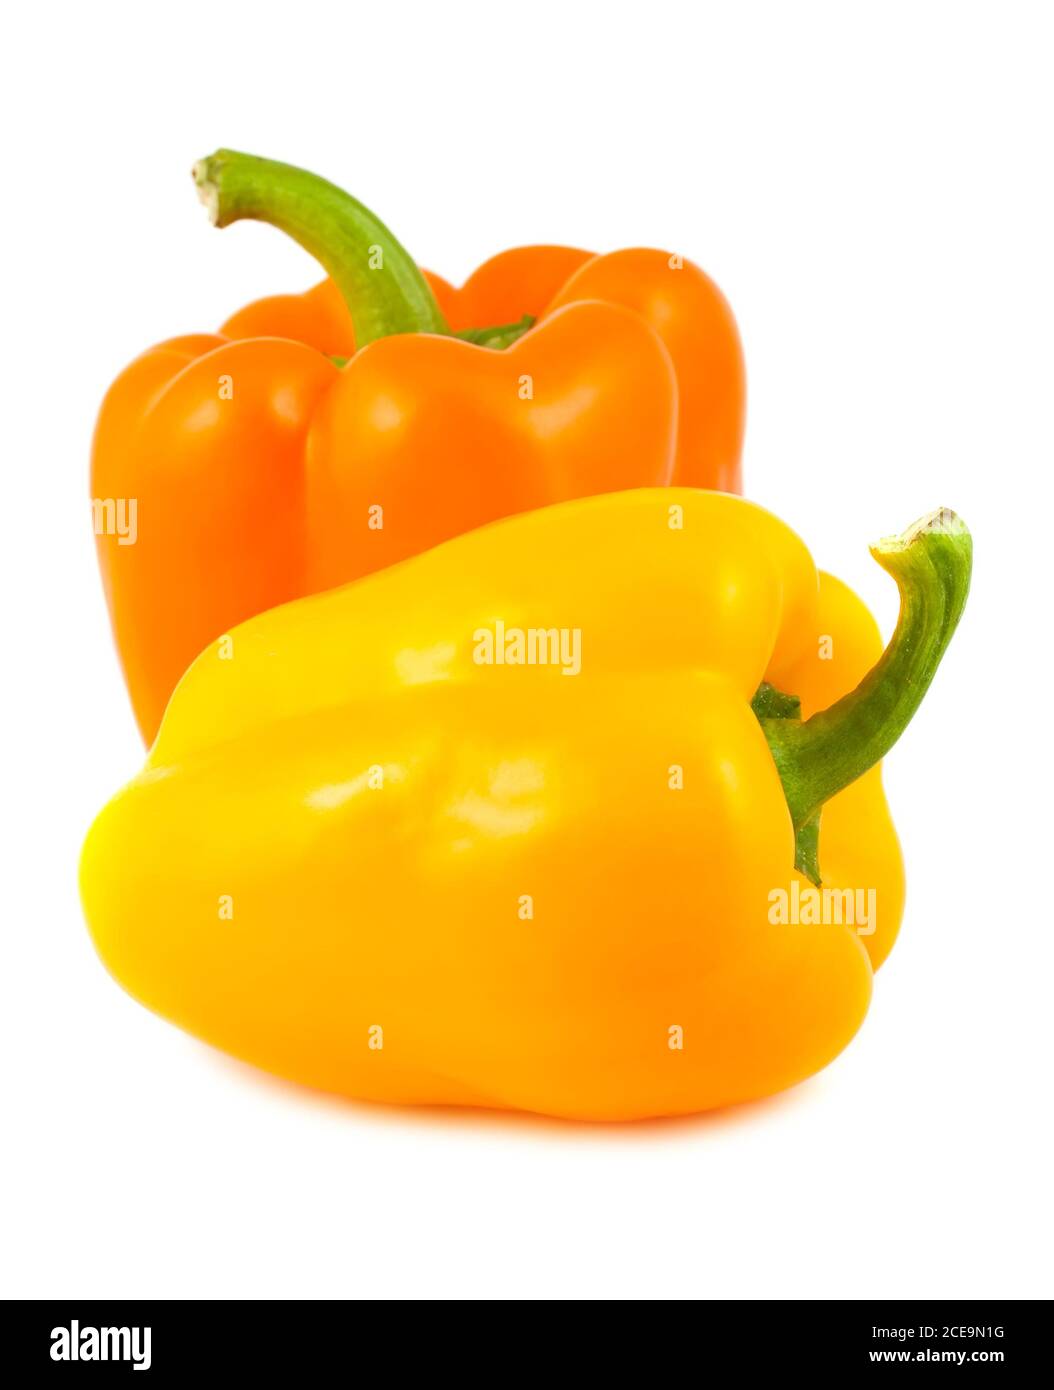 Yellow and orange peppers Stock Photo